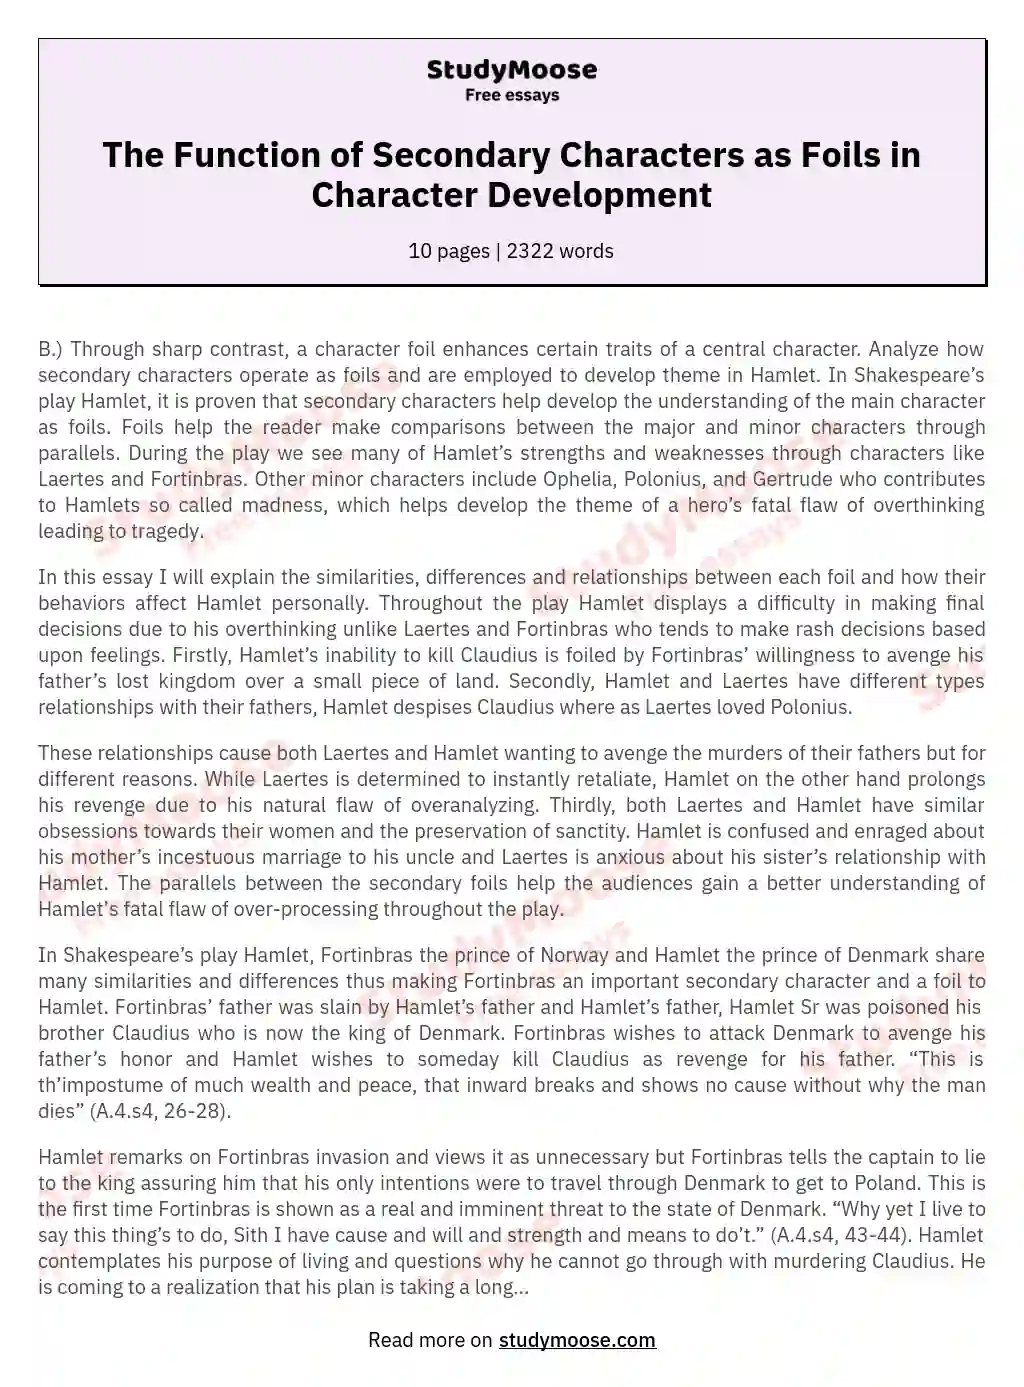 The Function of Secondary Characters as Foils in Character Development essay